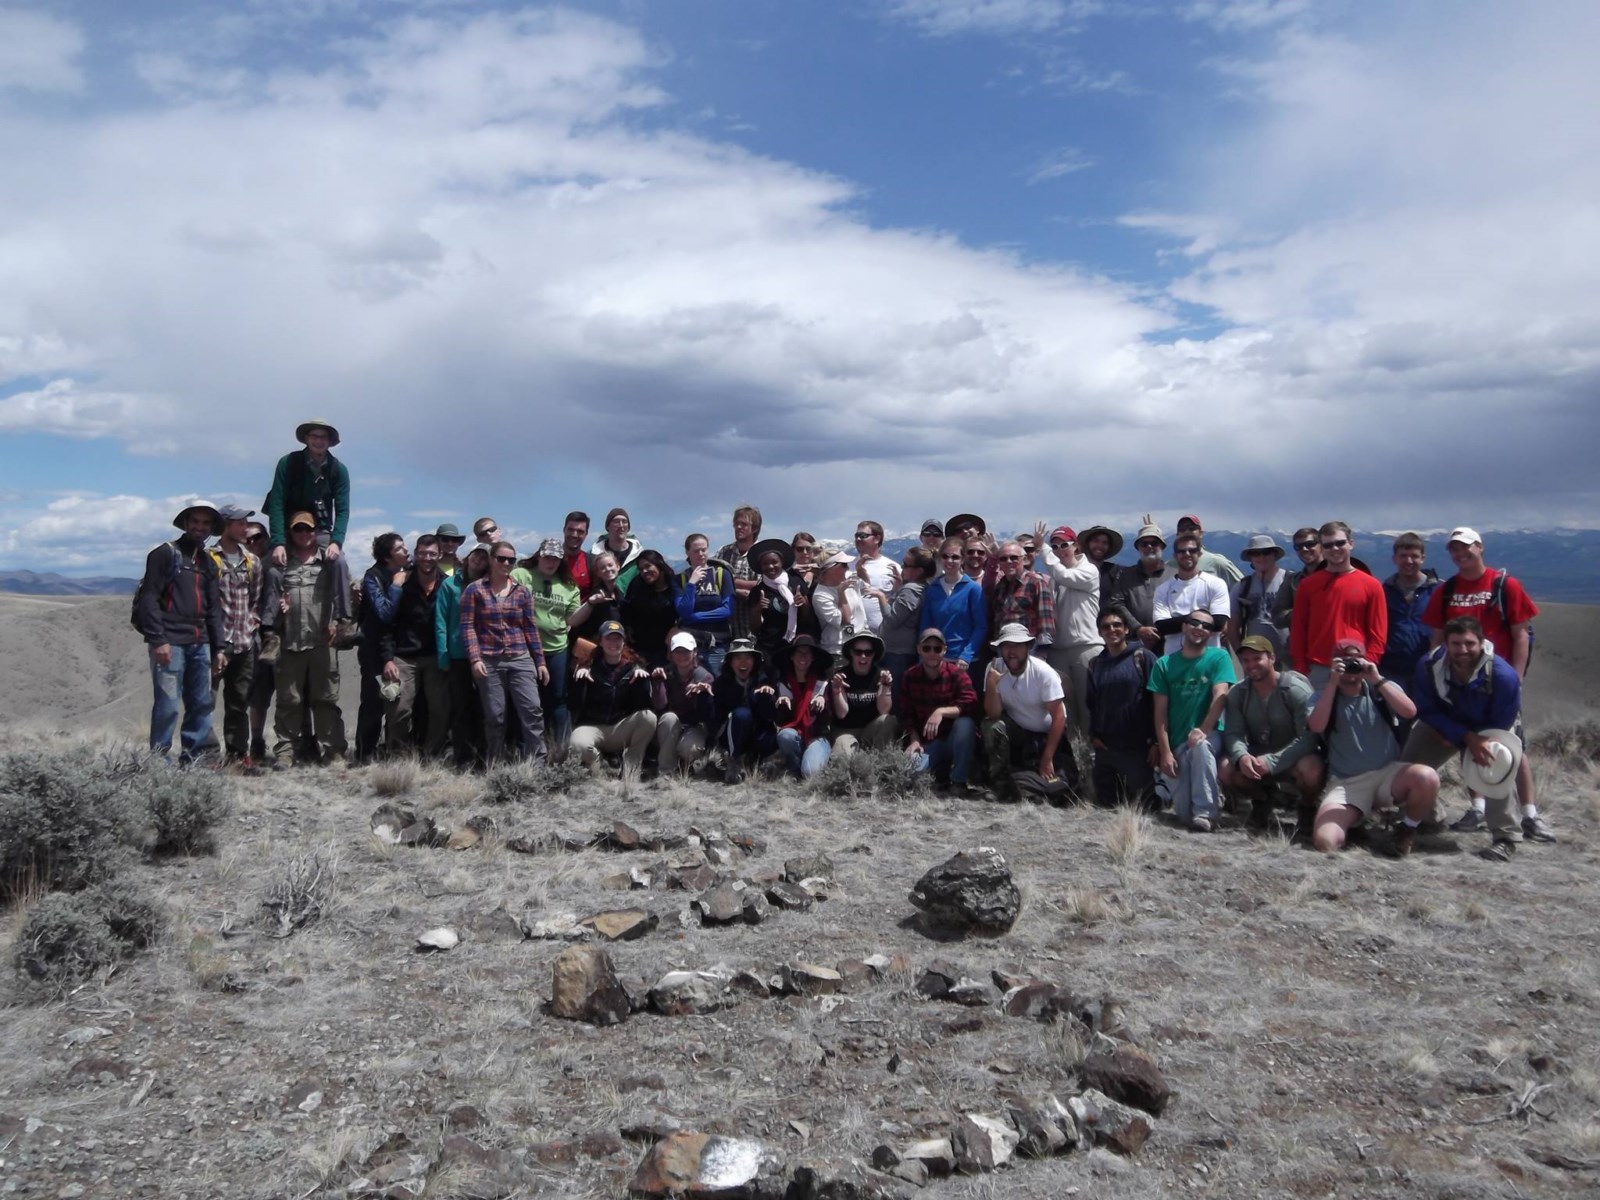 2013 Undergrduates at our summer field course in Montana.